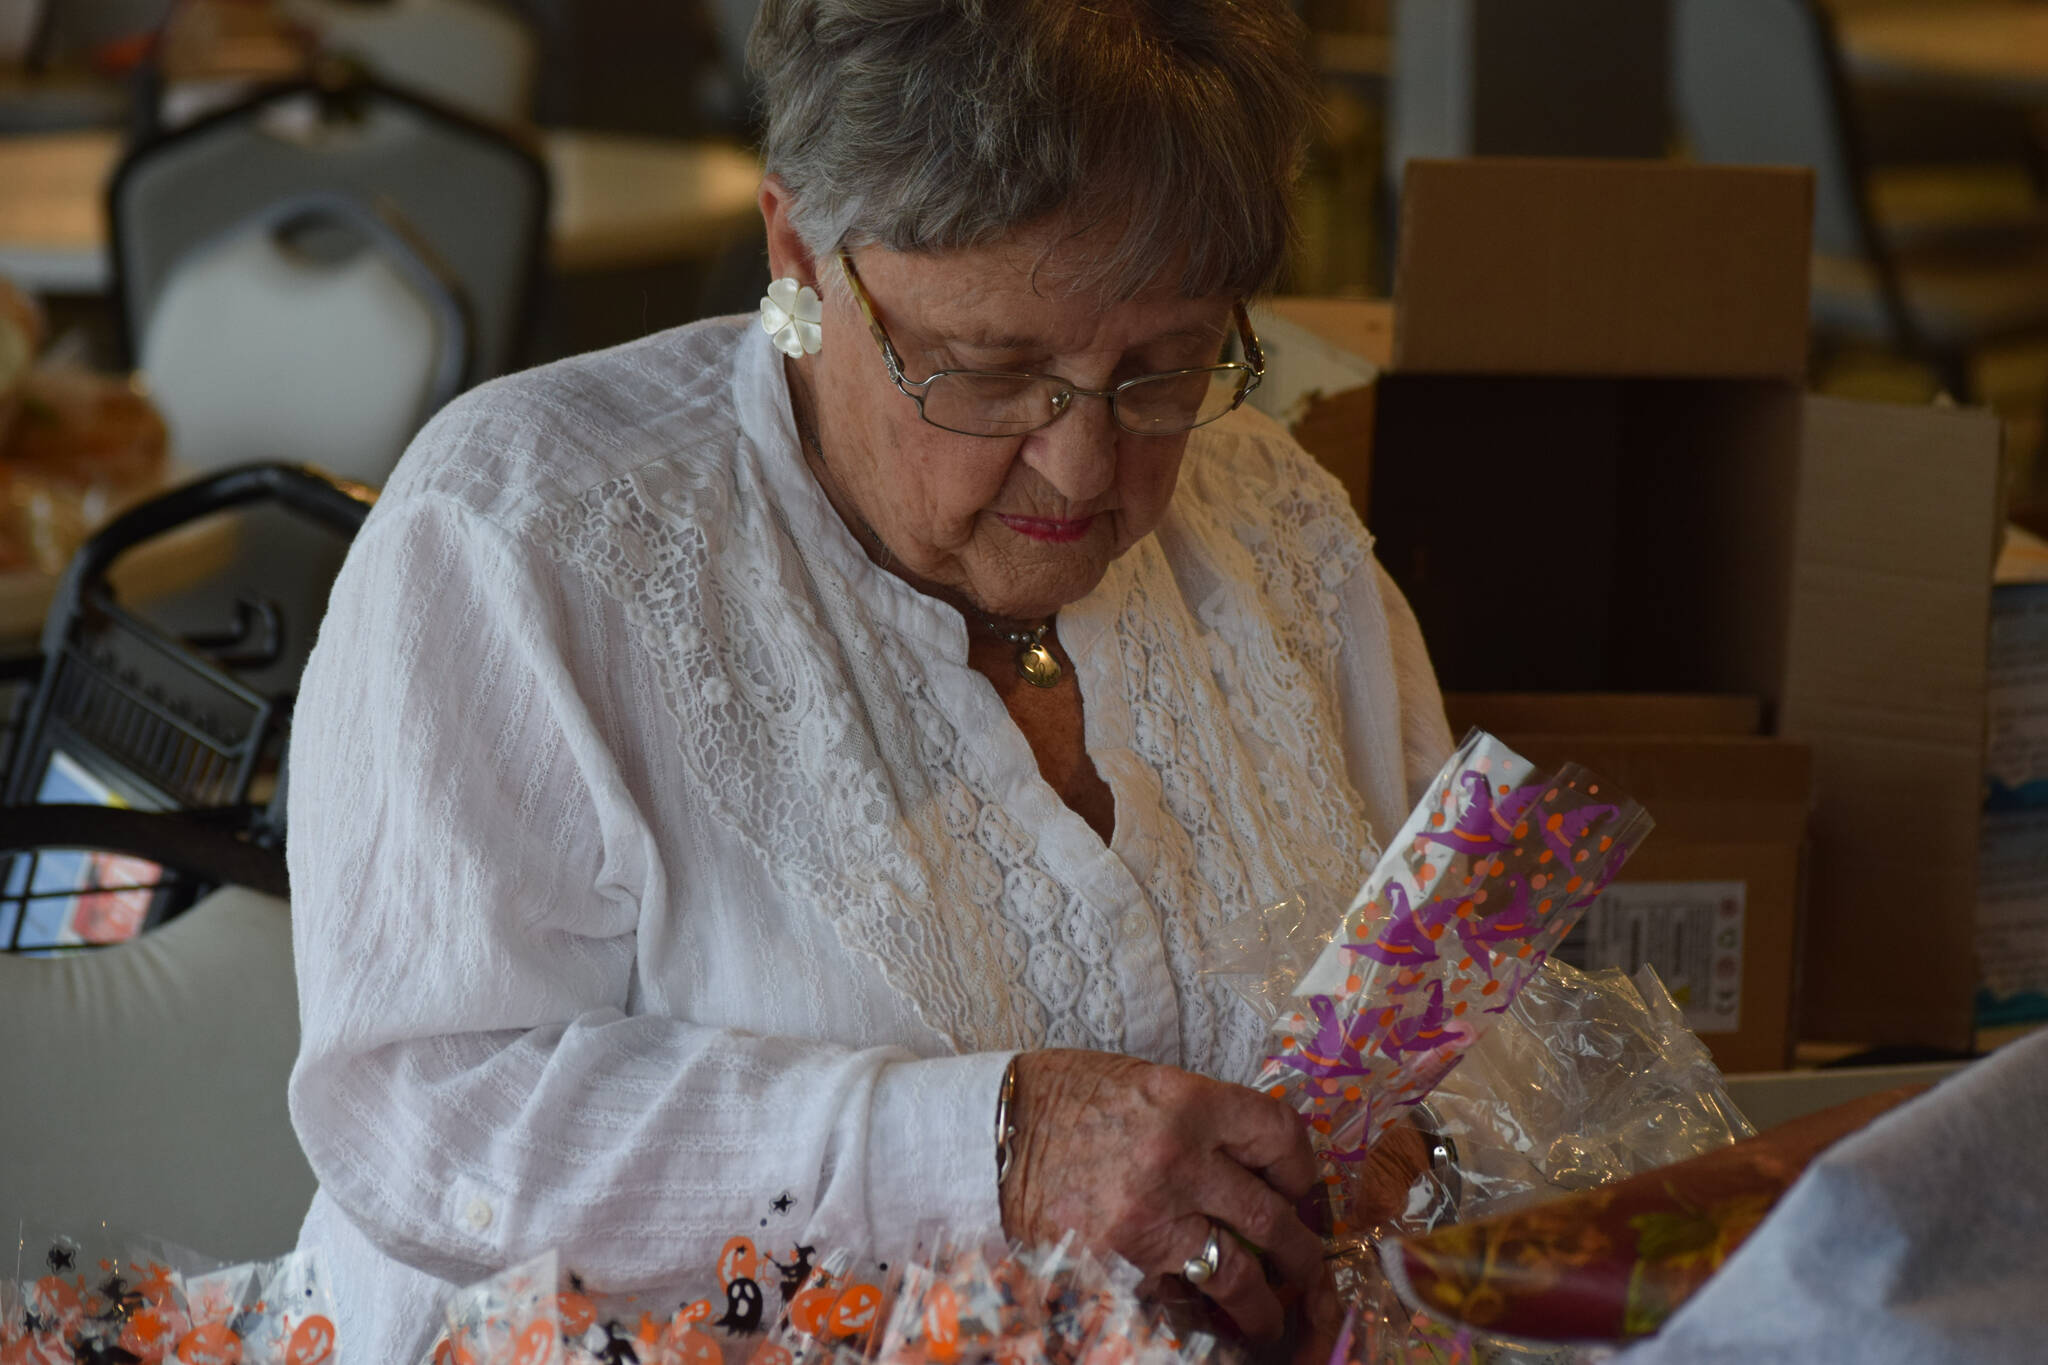 Velda Geller fills goodie bags at the Kenai Senior Center on Friday, Oct. 22, 2021 for next weekend’s drive-through trick-or-treat event. (Camille Botello/Peninsula Clarion)